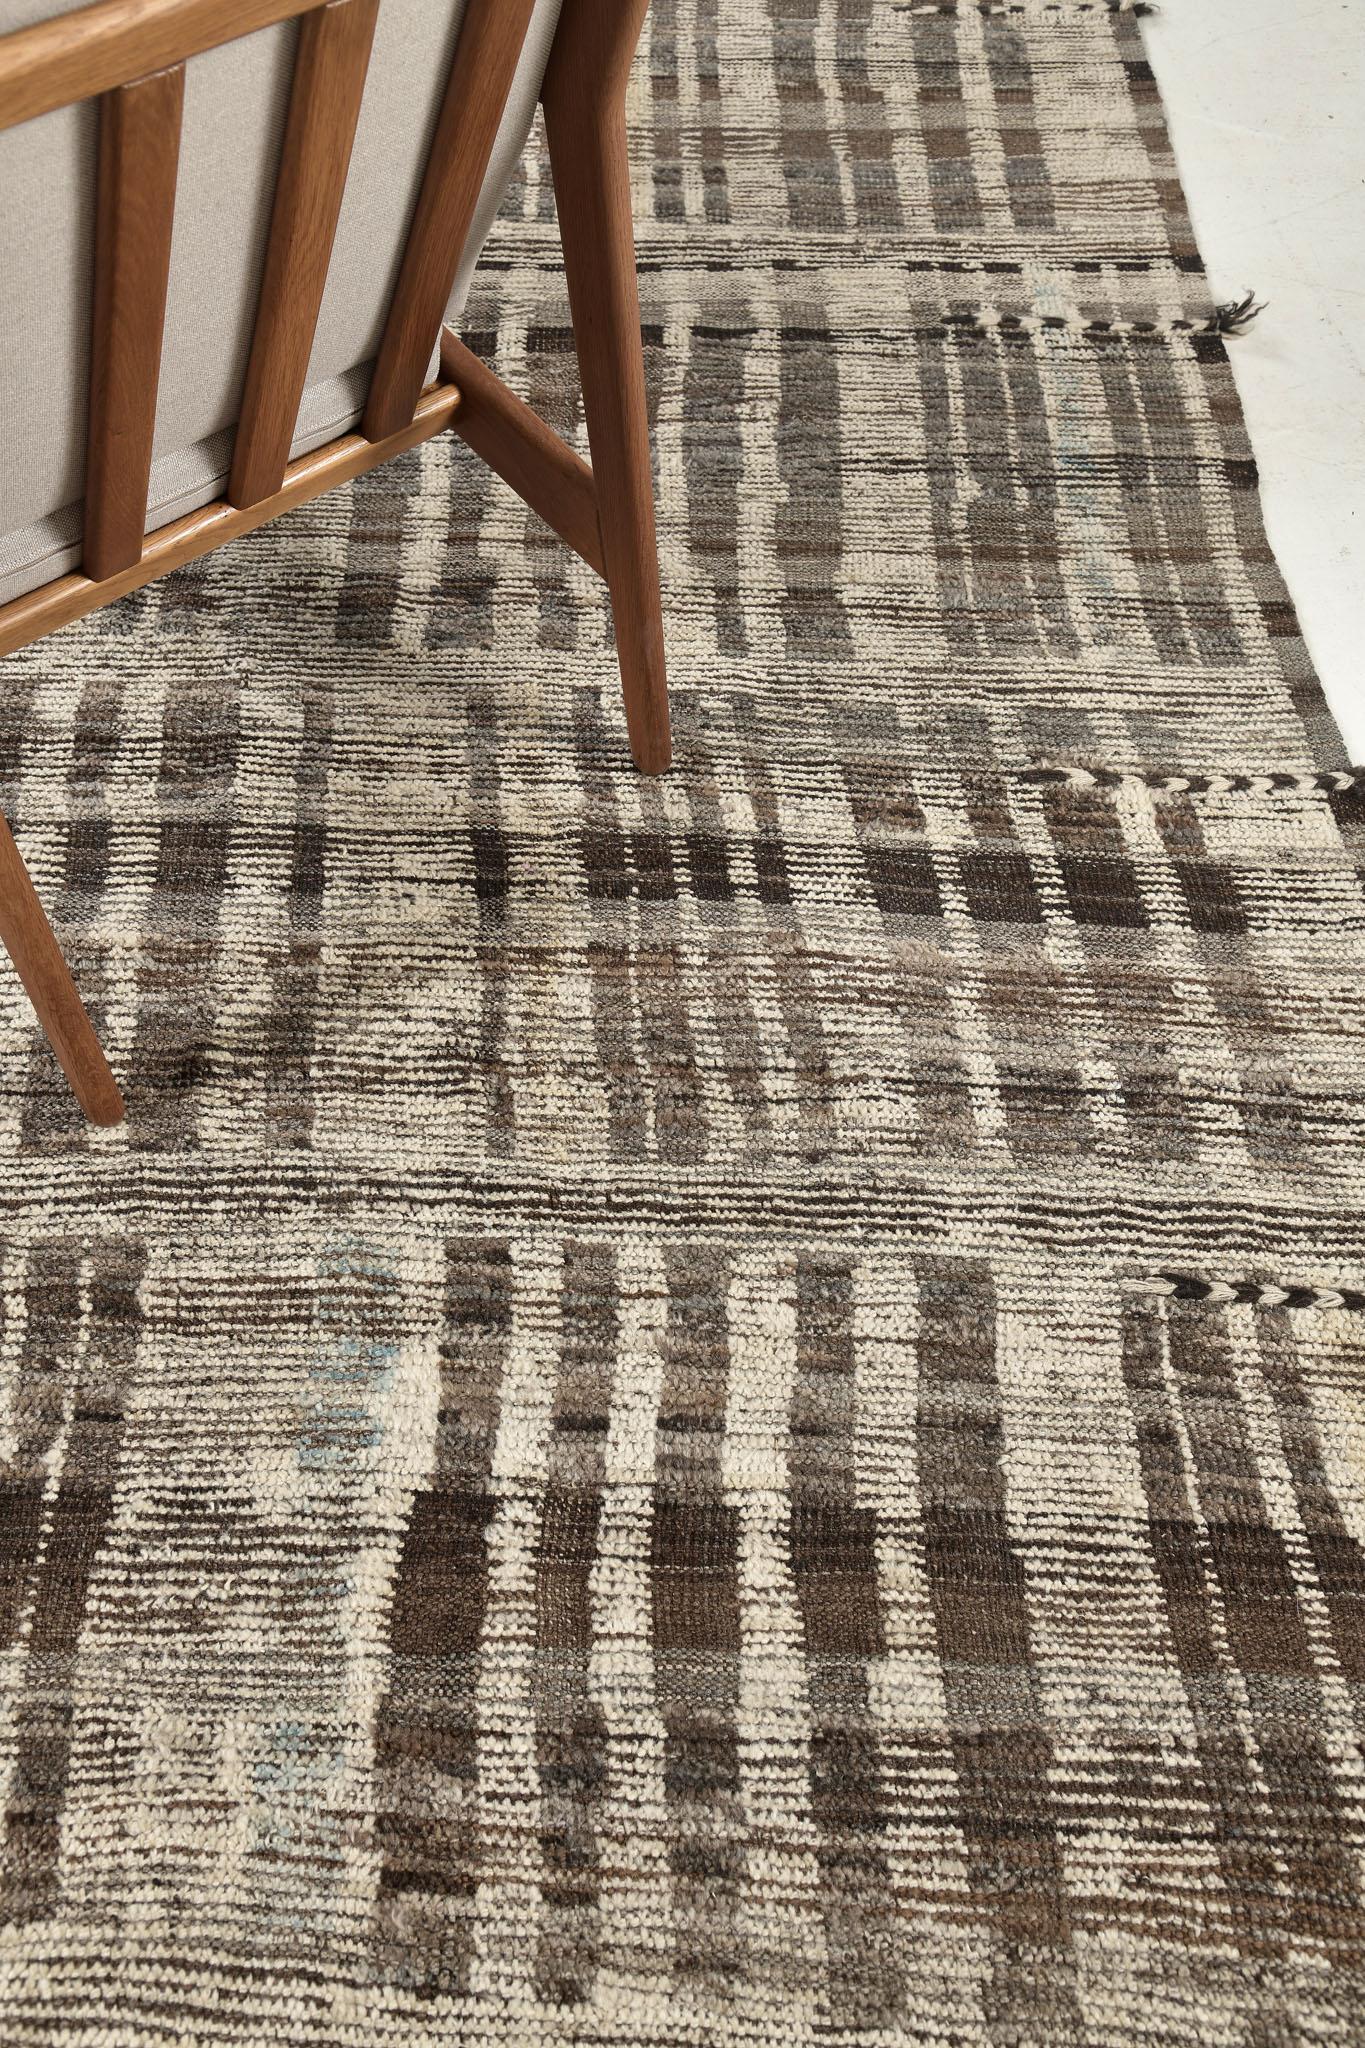 Bacatta uses linework and color to create definition and movement in handwoven wool. Line detailing in neutral tones fascinatingly moves across the rug. Detailed natural flatweave runs around the border with tassels adding an exquisite decorative